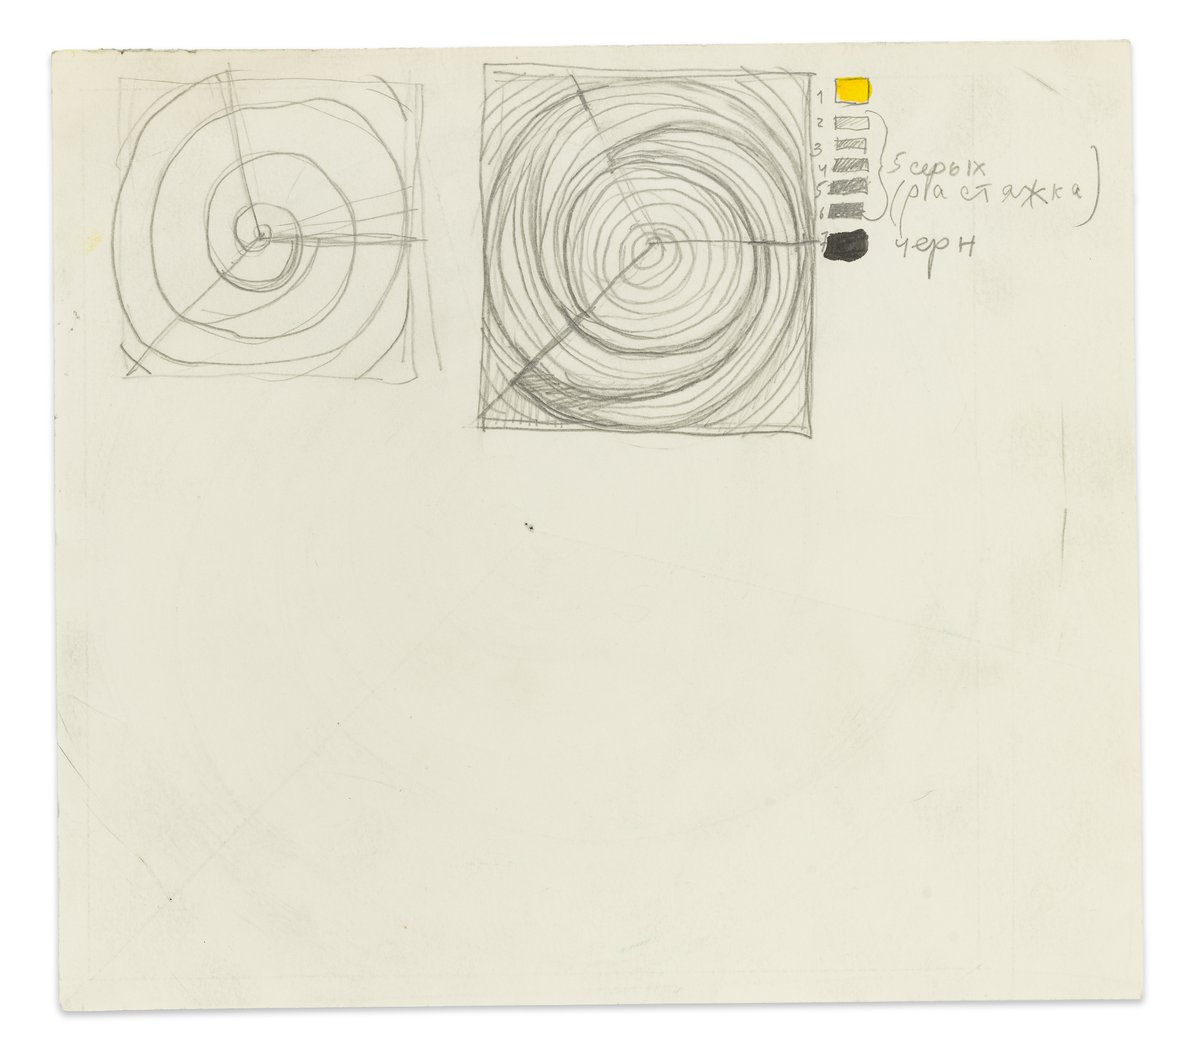 Anna AndreevaSTCU. Design for the Union of Scientific and Technical Creativity of Youth, 1974 (verso)Mixed media on paper21 x 23.5 cm